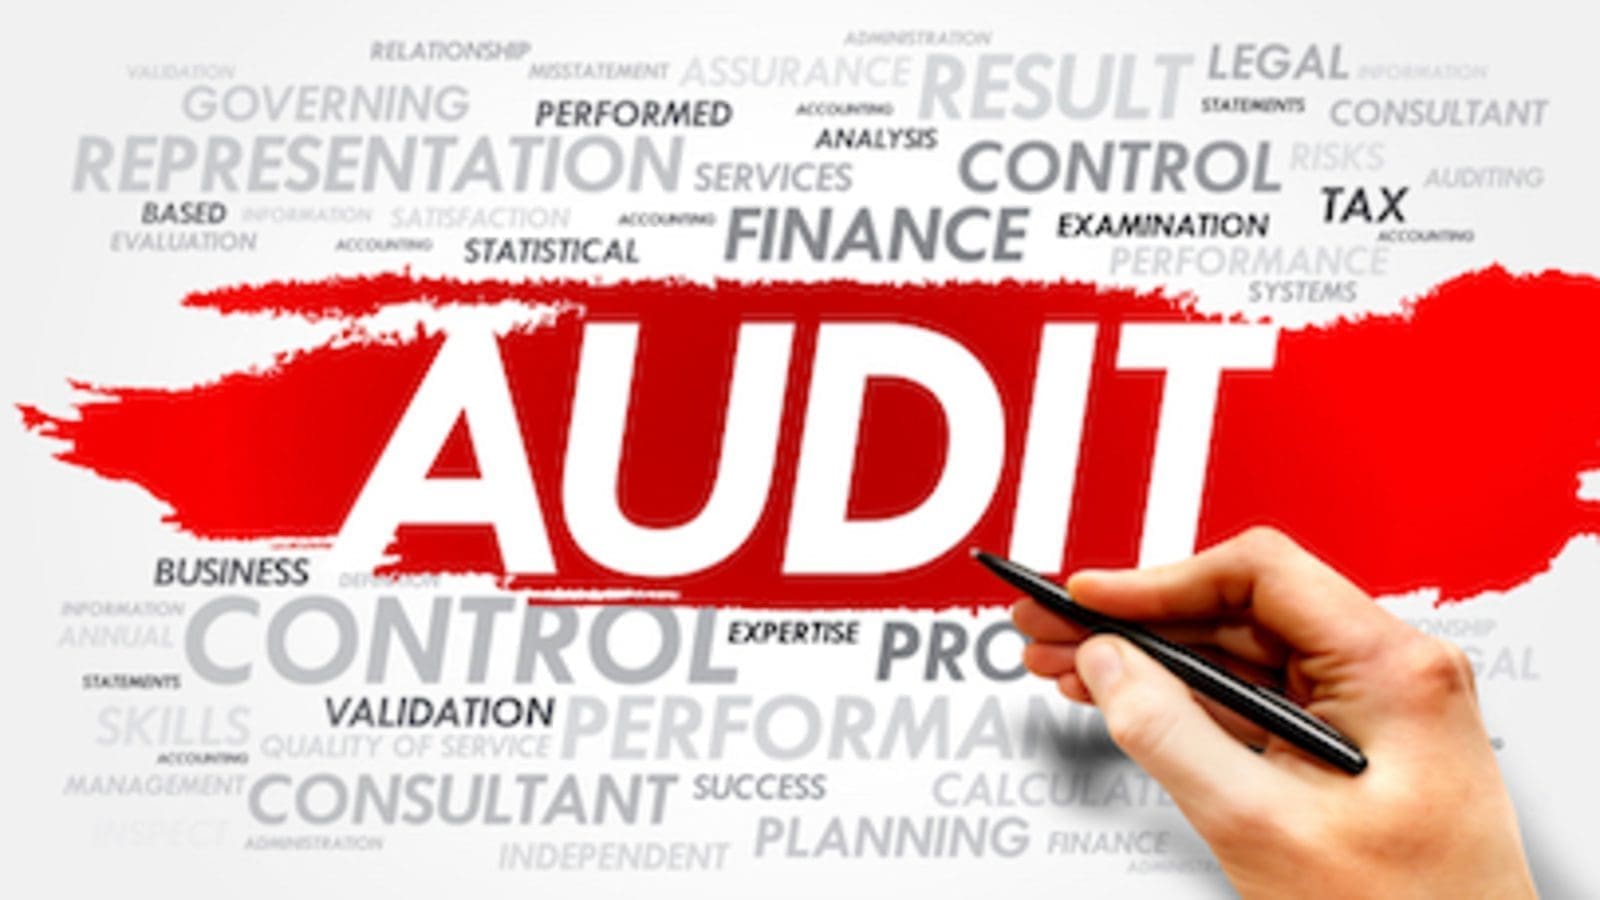 GFSI launches benchmarking requirements for auditor certification bodies